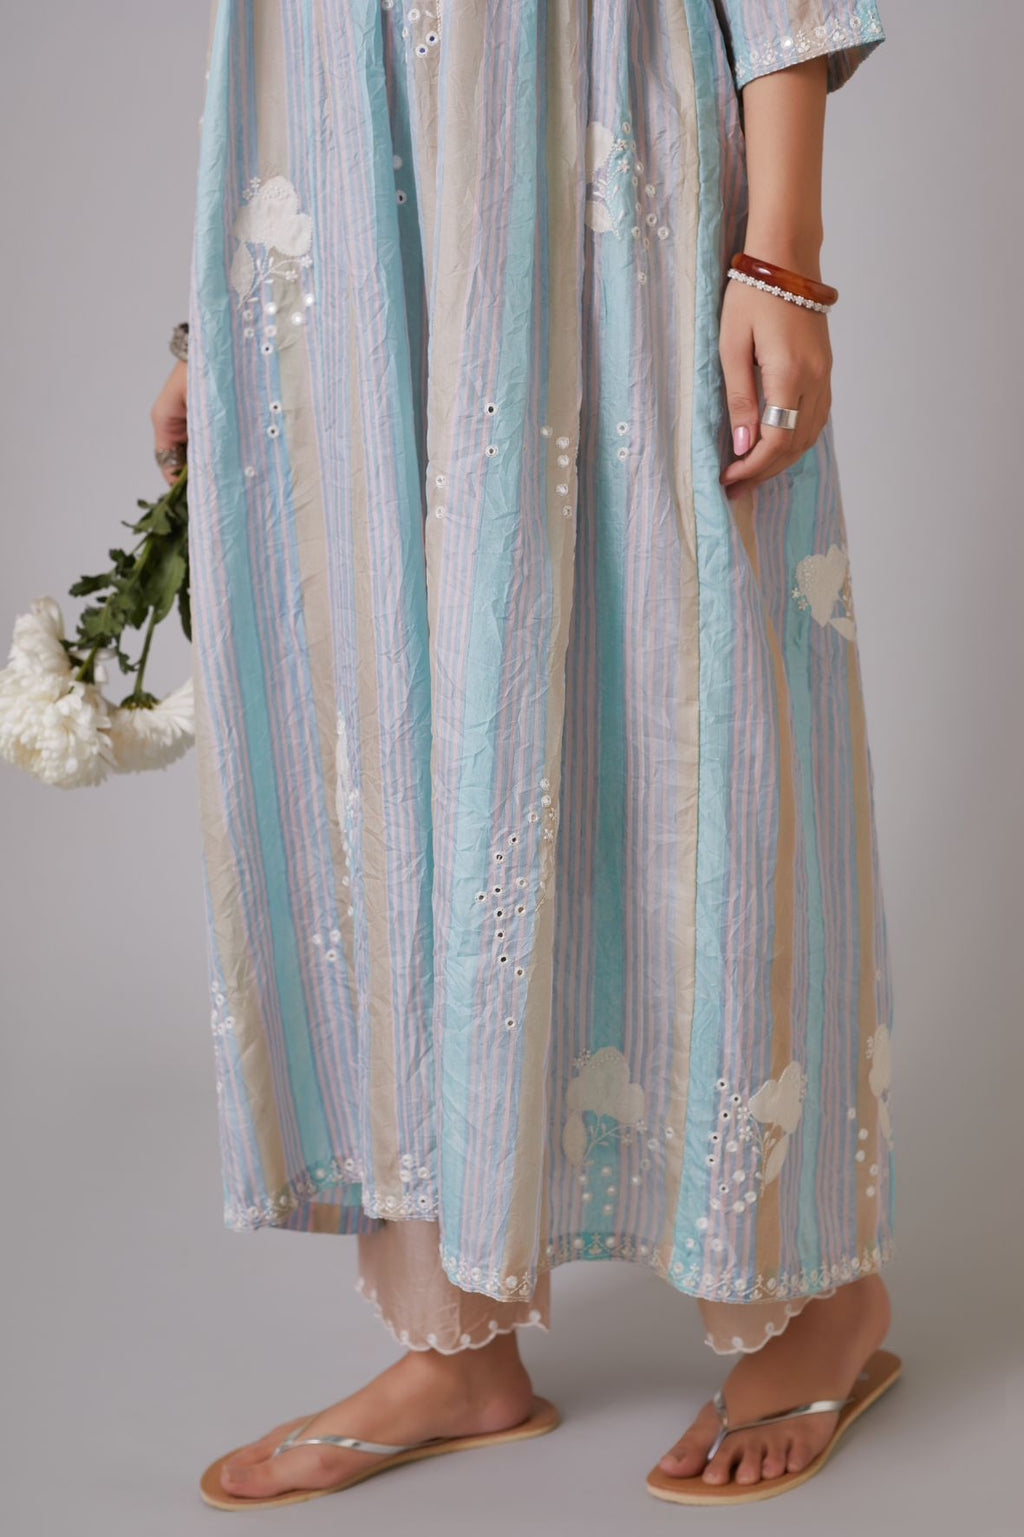 Multi striped hand-crushed silk kurta set with wavy empire waistline and gathers, highlighted with applique flower embroidery and mirror hand work.